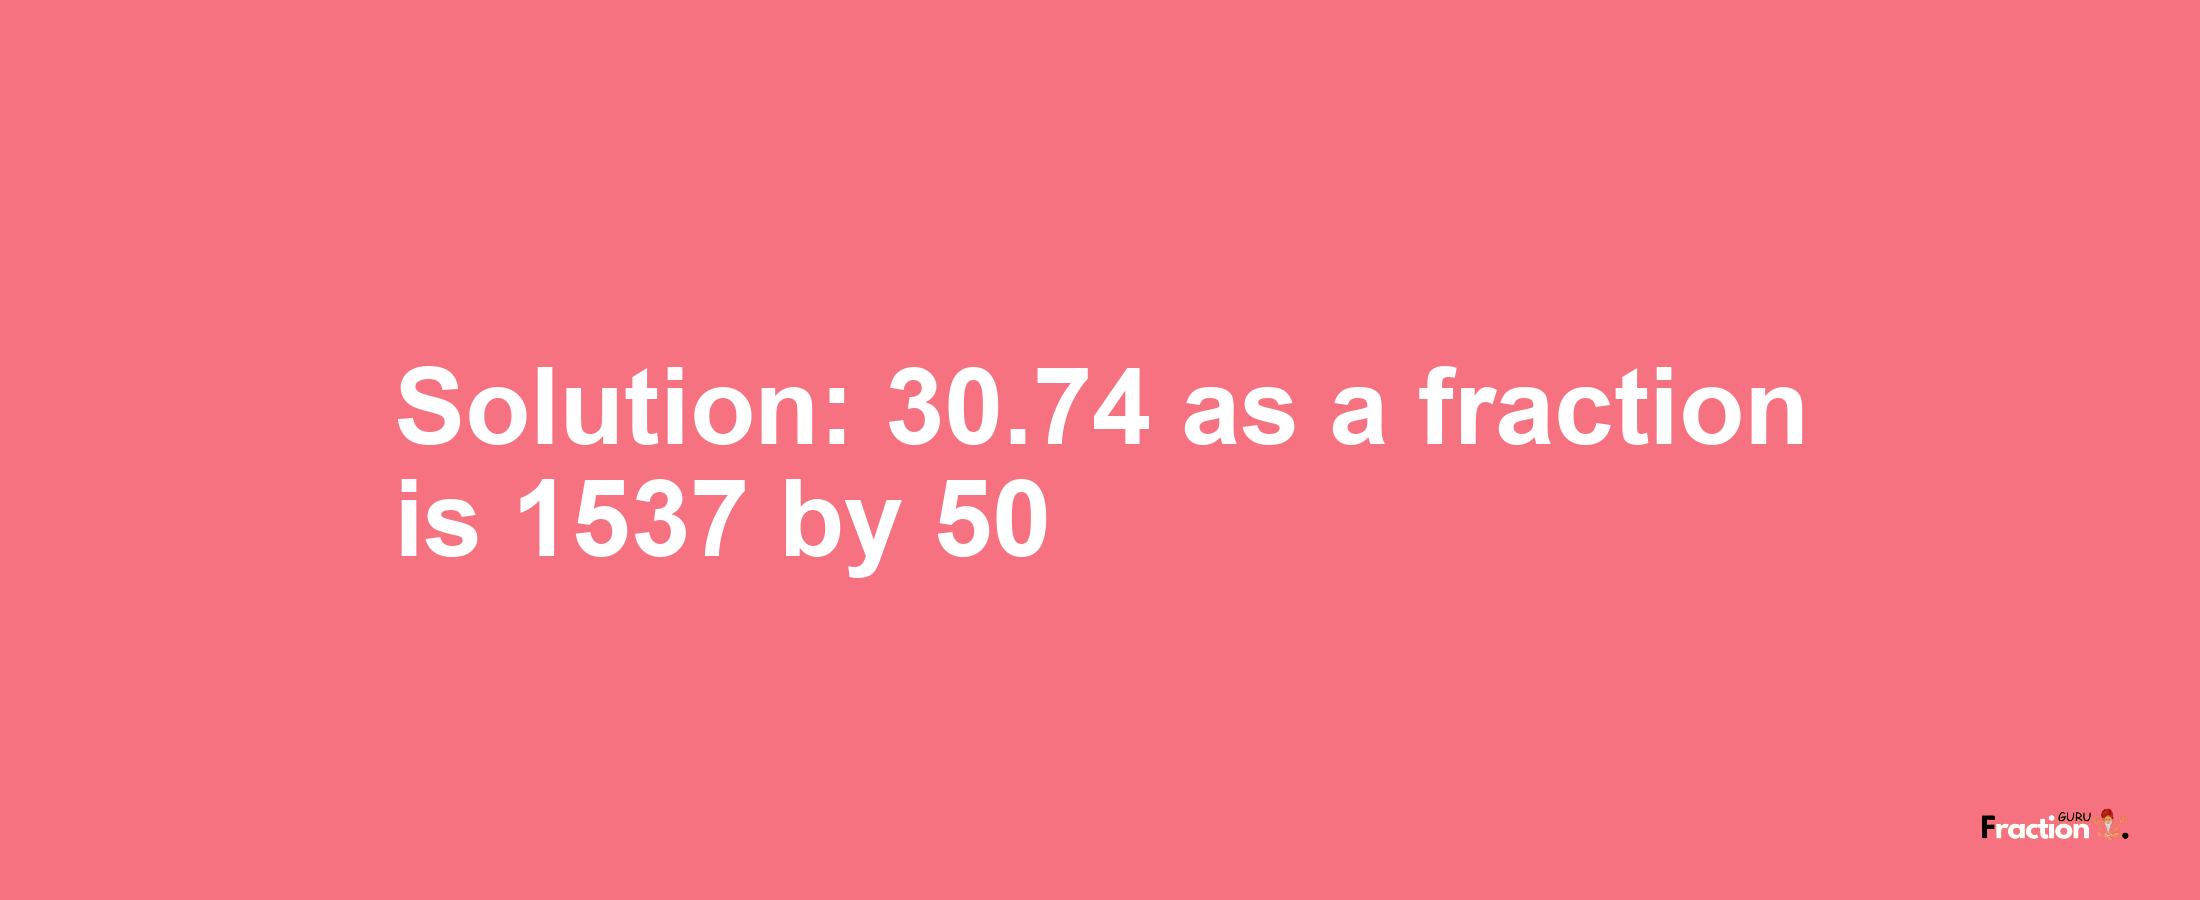 Solution:30.74 as a fraction is 1537/50